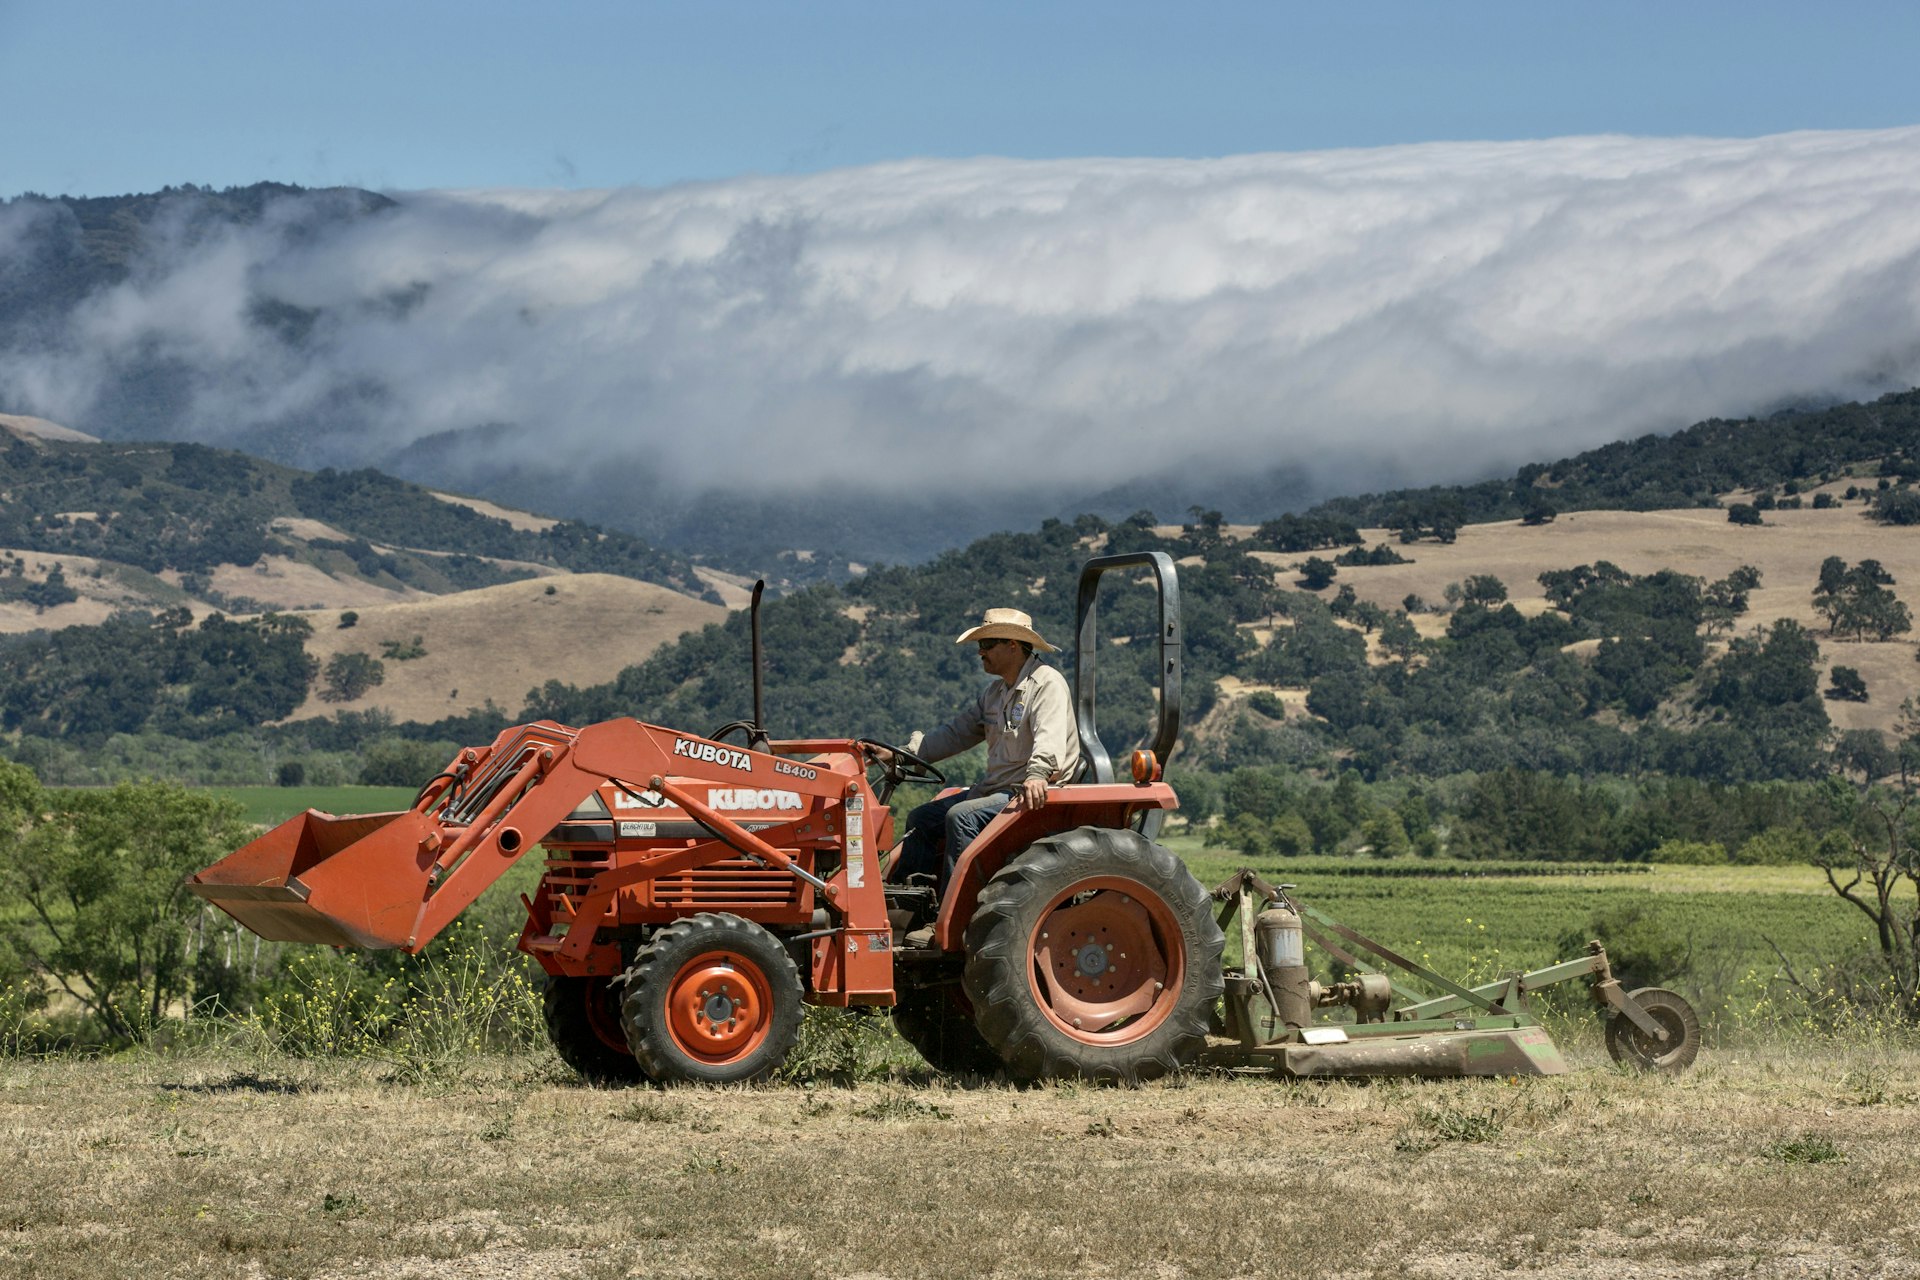 A farmer rides a tractor in fields, with a wall of fog atop of the Santa Ynez Mountain in the distance, Solvang, California, USA